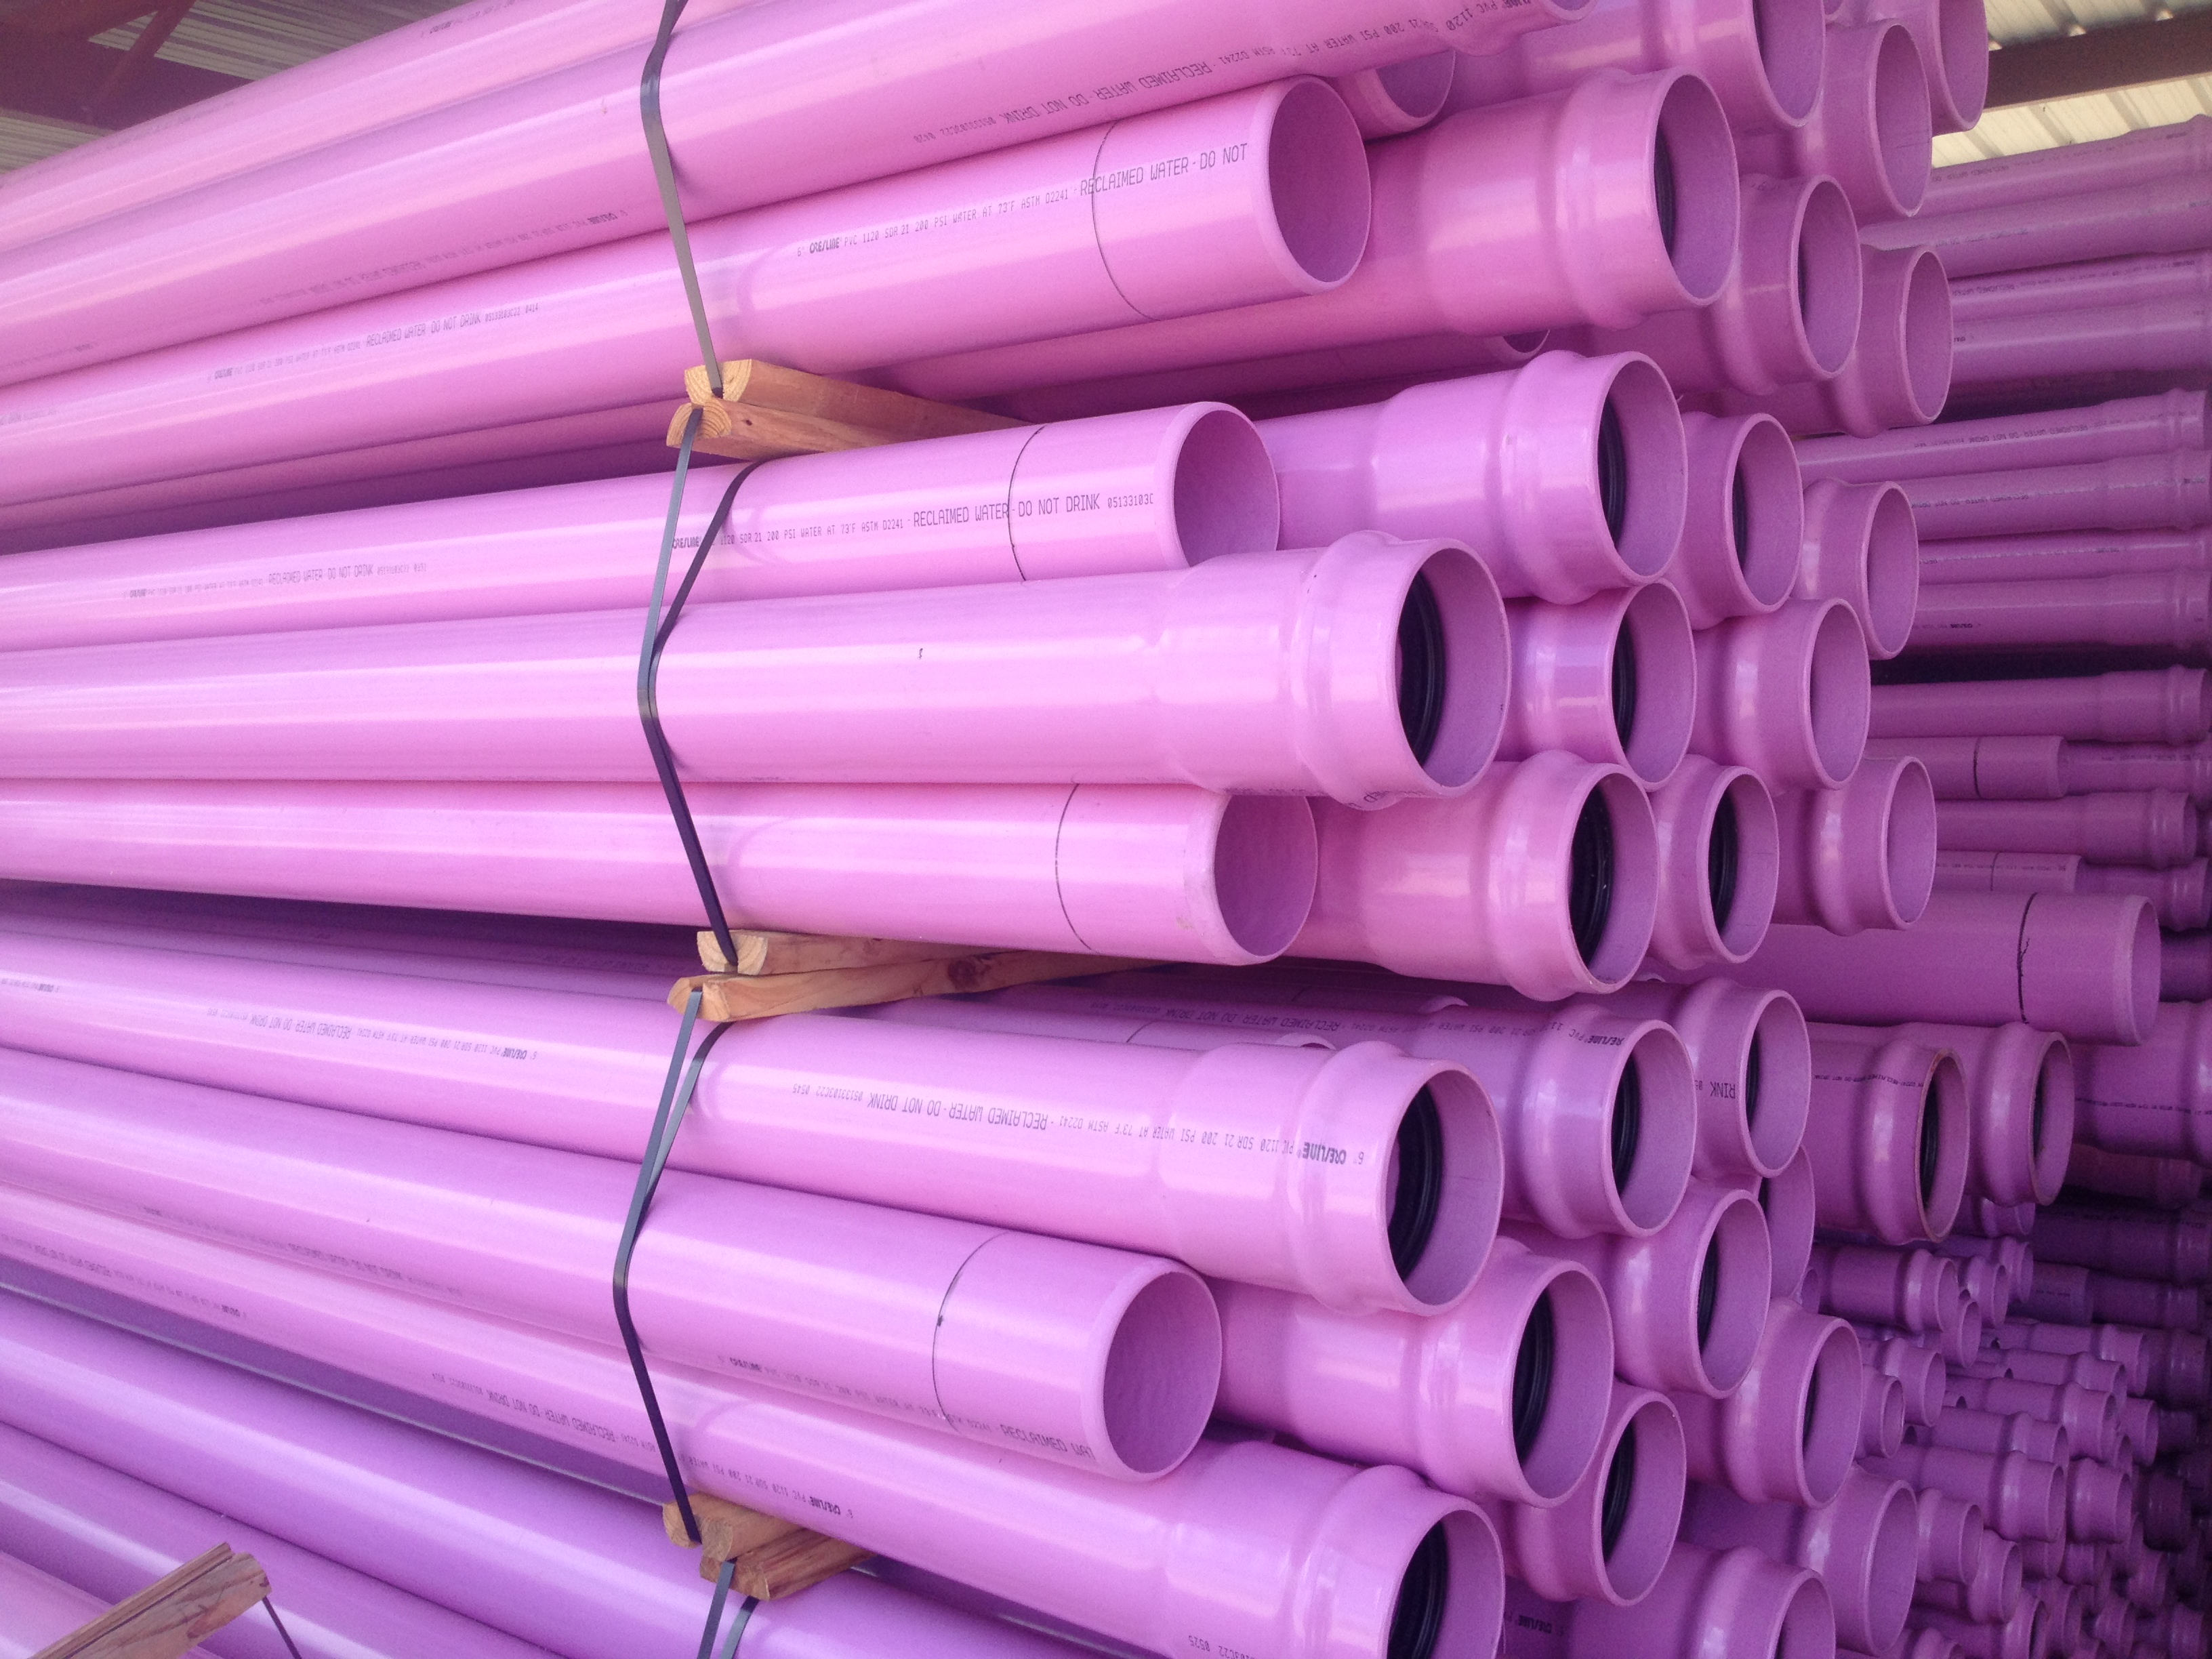 what is pvc 1120 used for